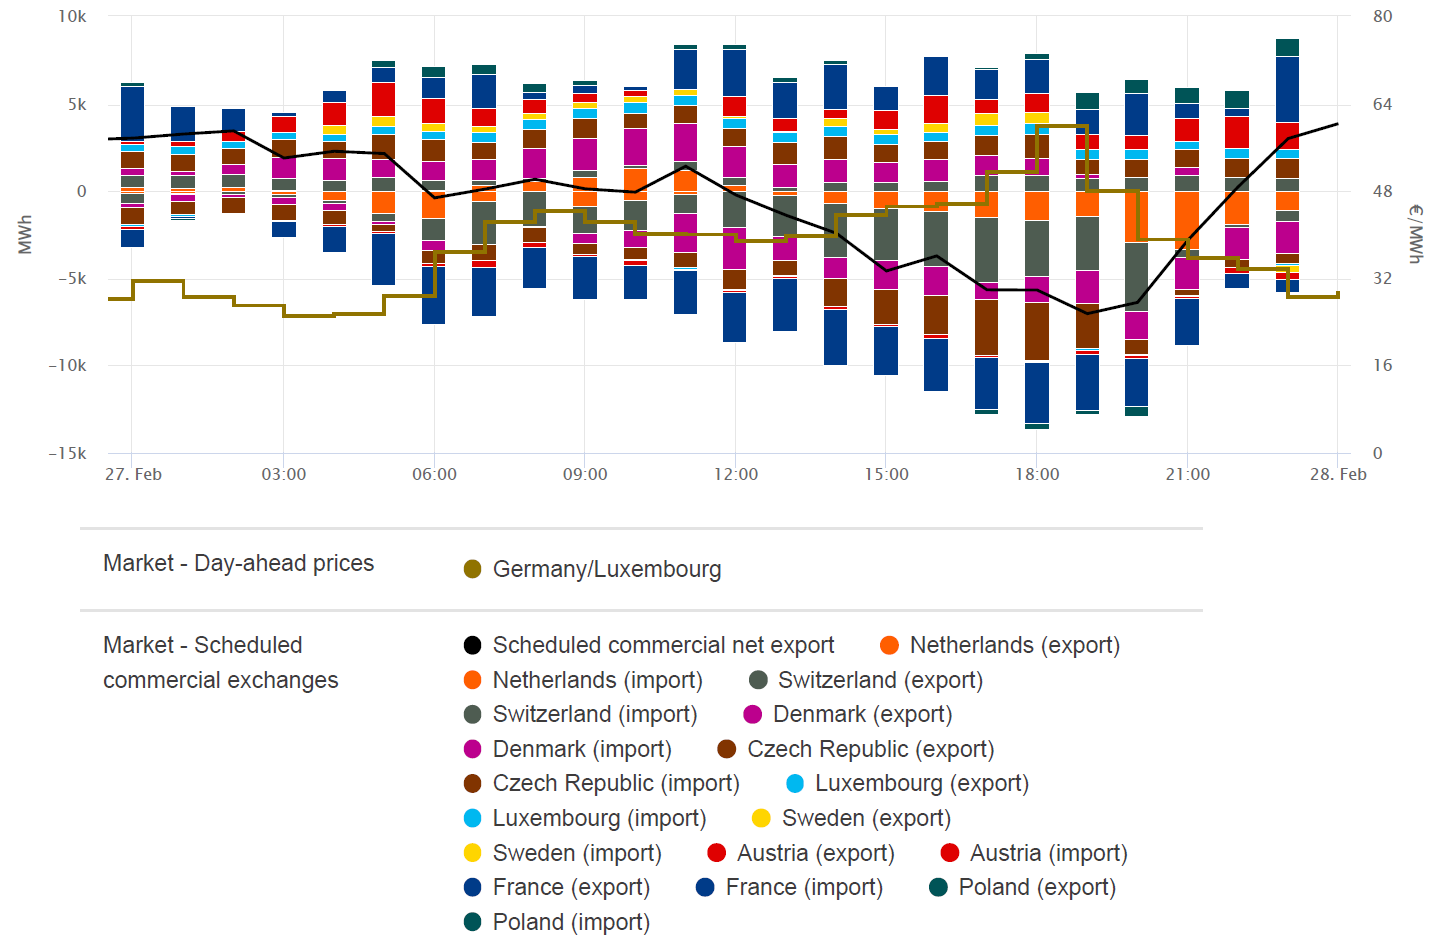 Highest price and electricity trade on 27 February 2020